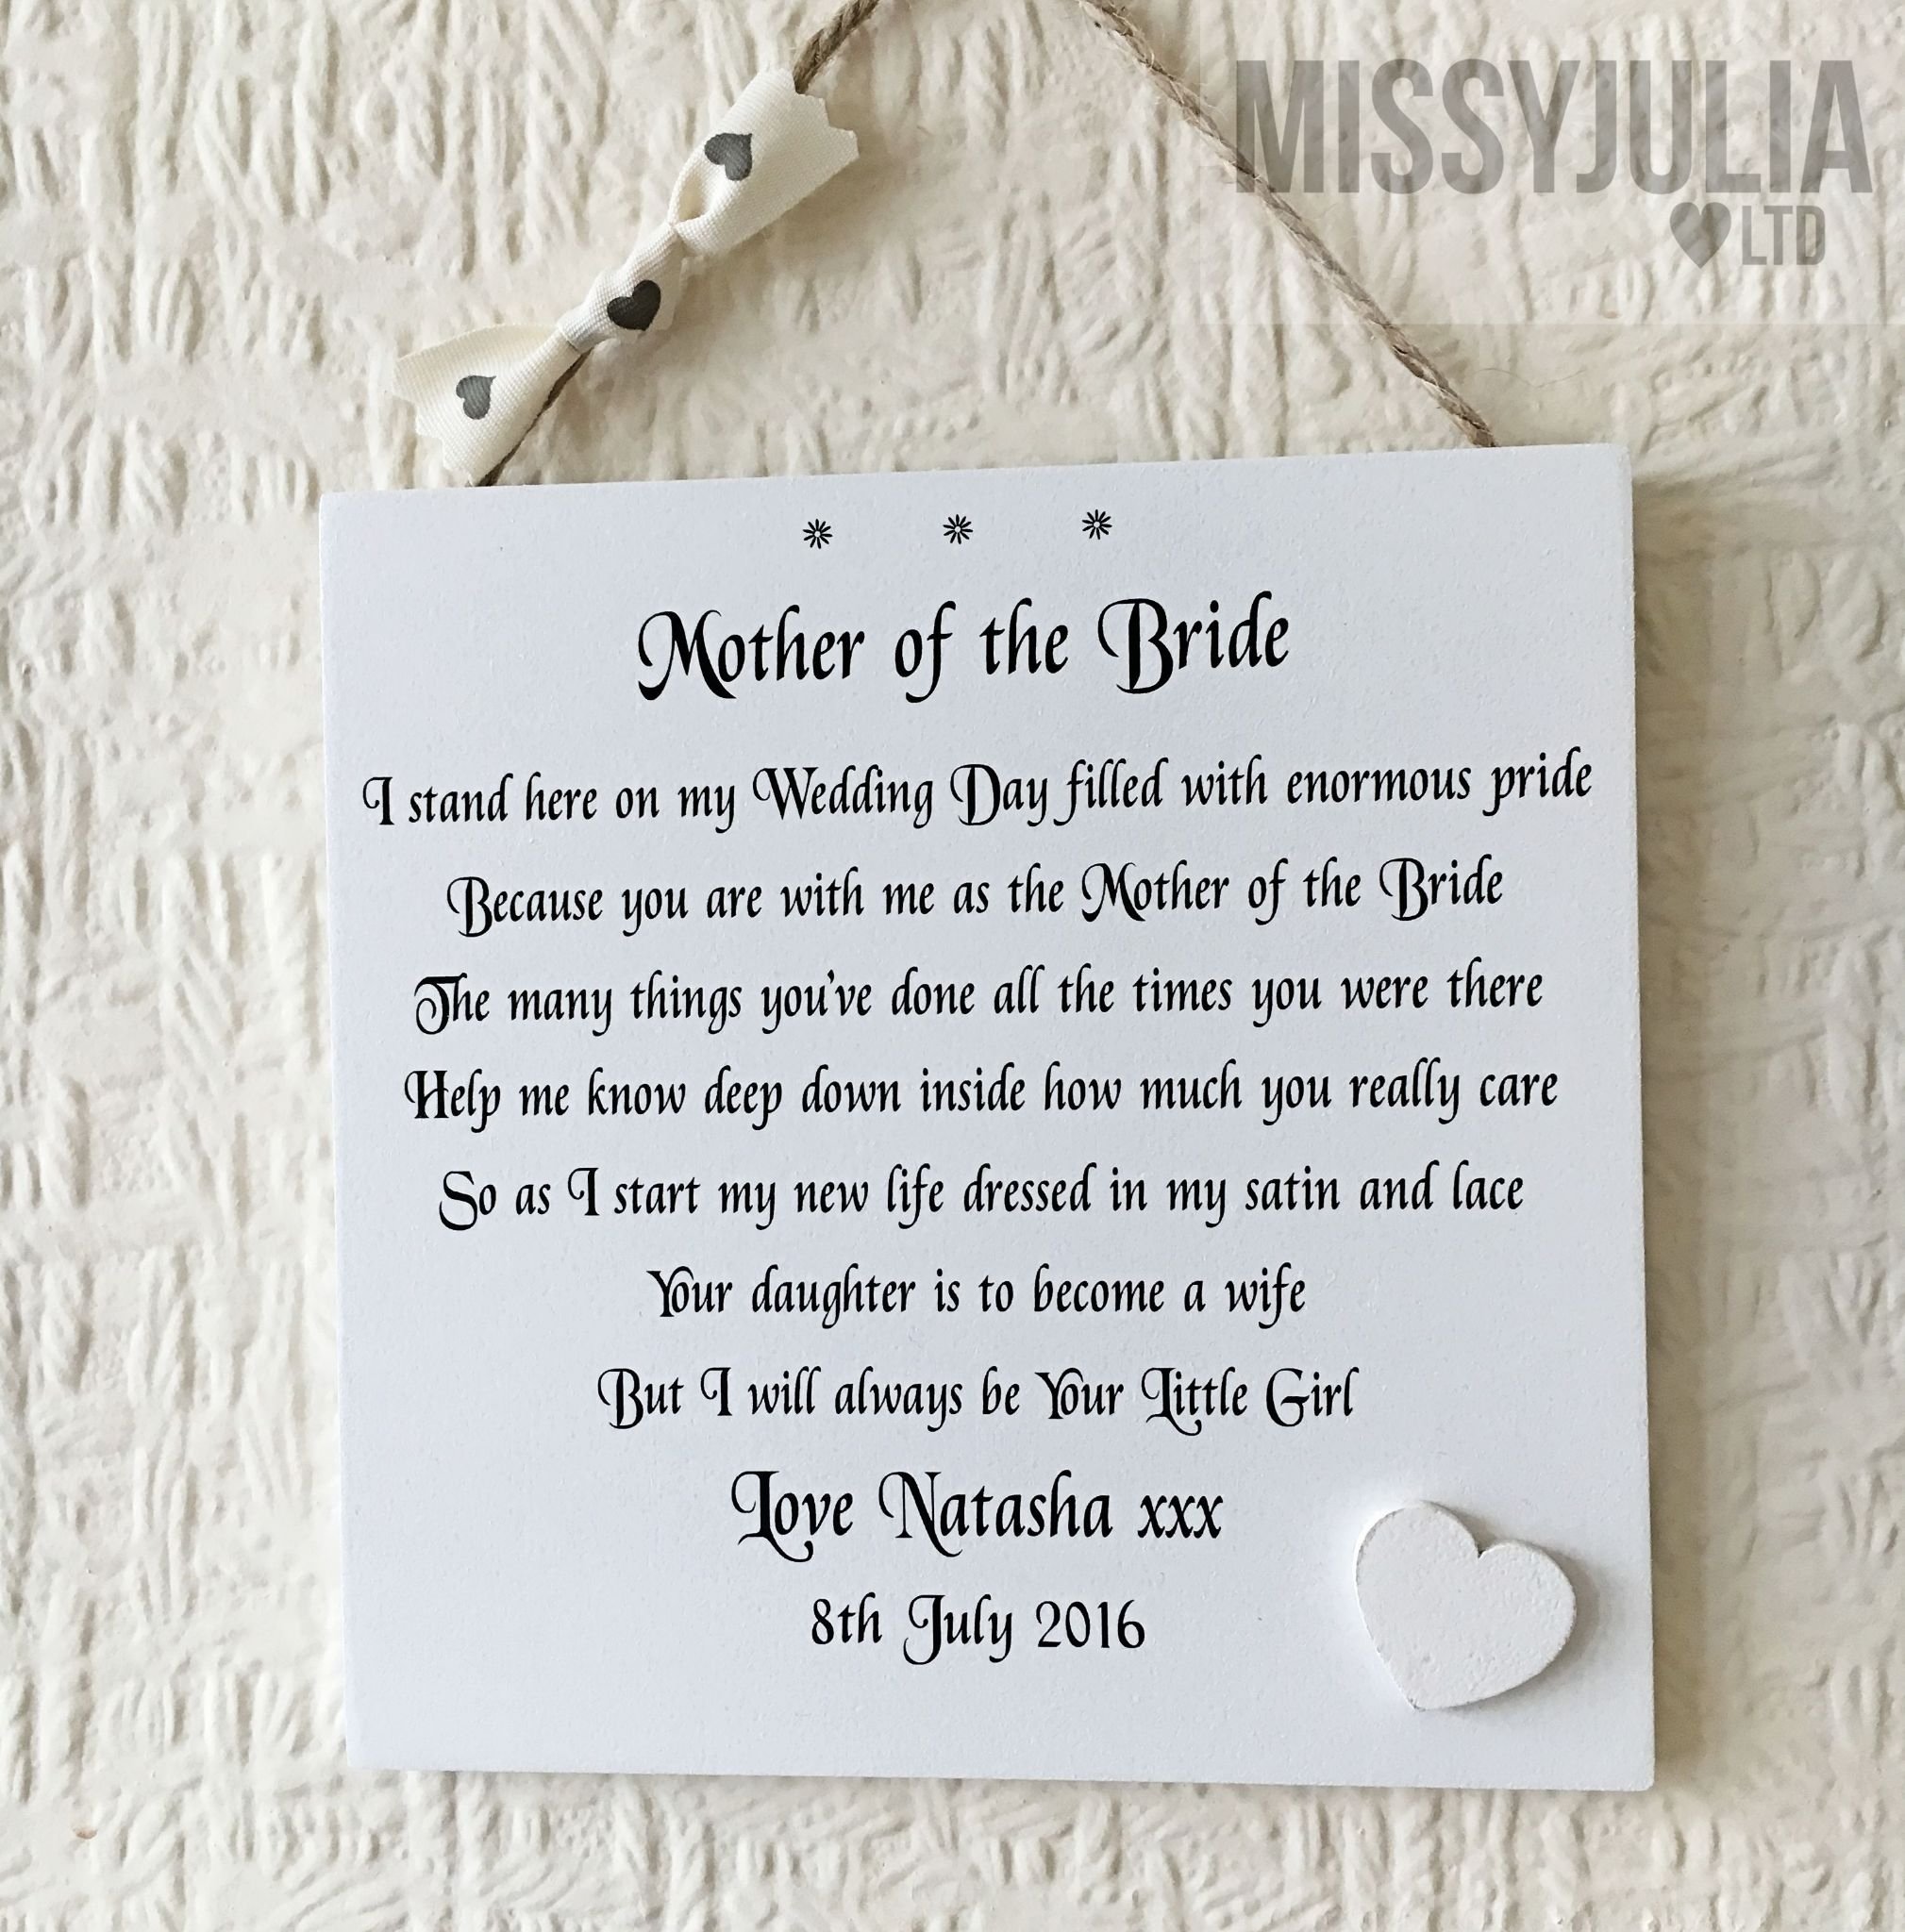 10 Awesome Mother Of The Bride Gifts Ideas mother of the bride wedding shabby chic sign wooden plaque gift 1 2022